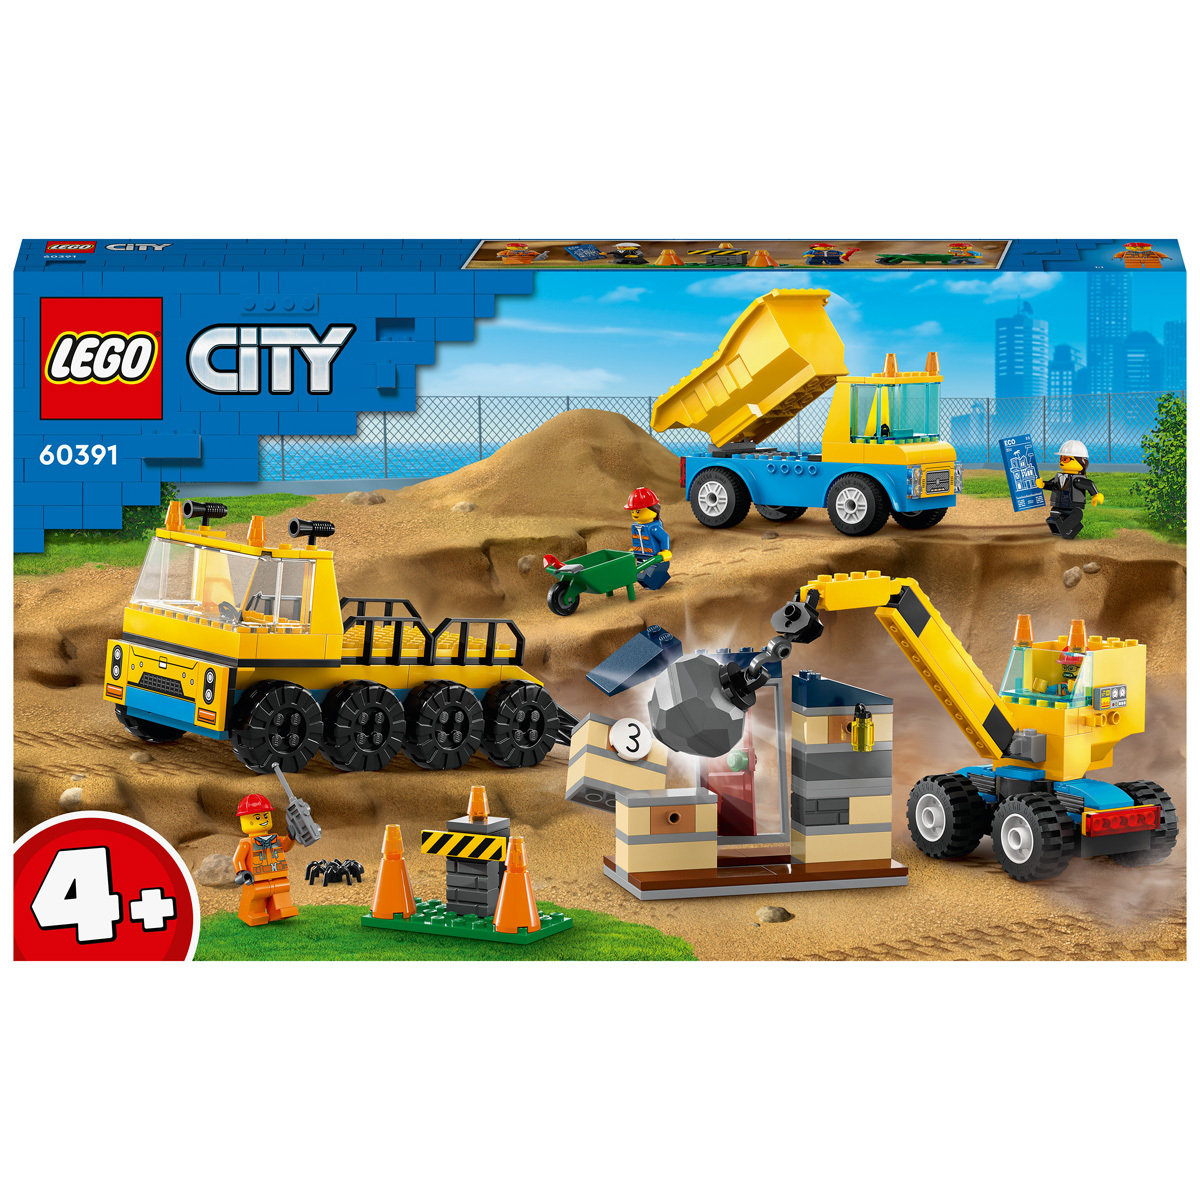 LEGO City Construction Trucks & Wrecking Ball Crane 60391 | Early Learning  Centre